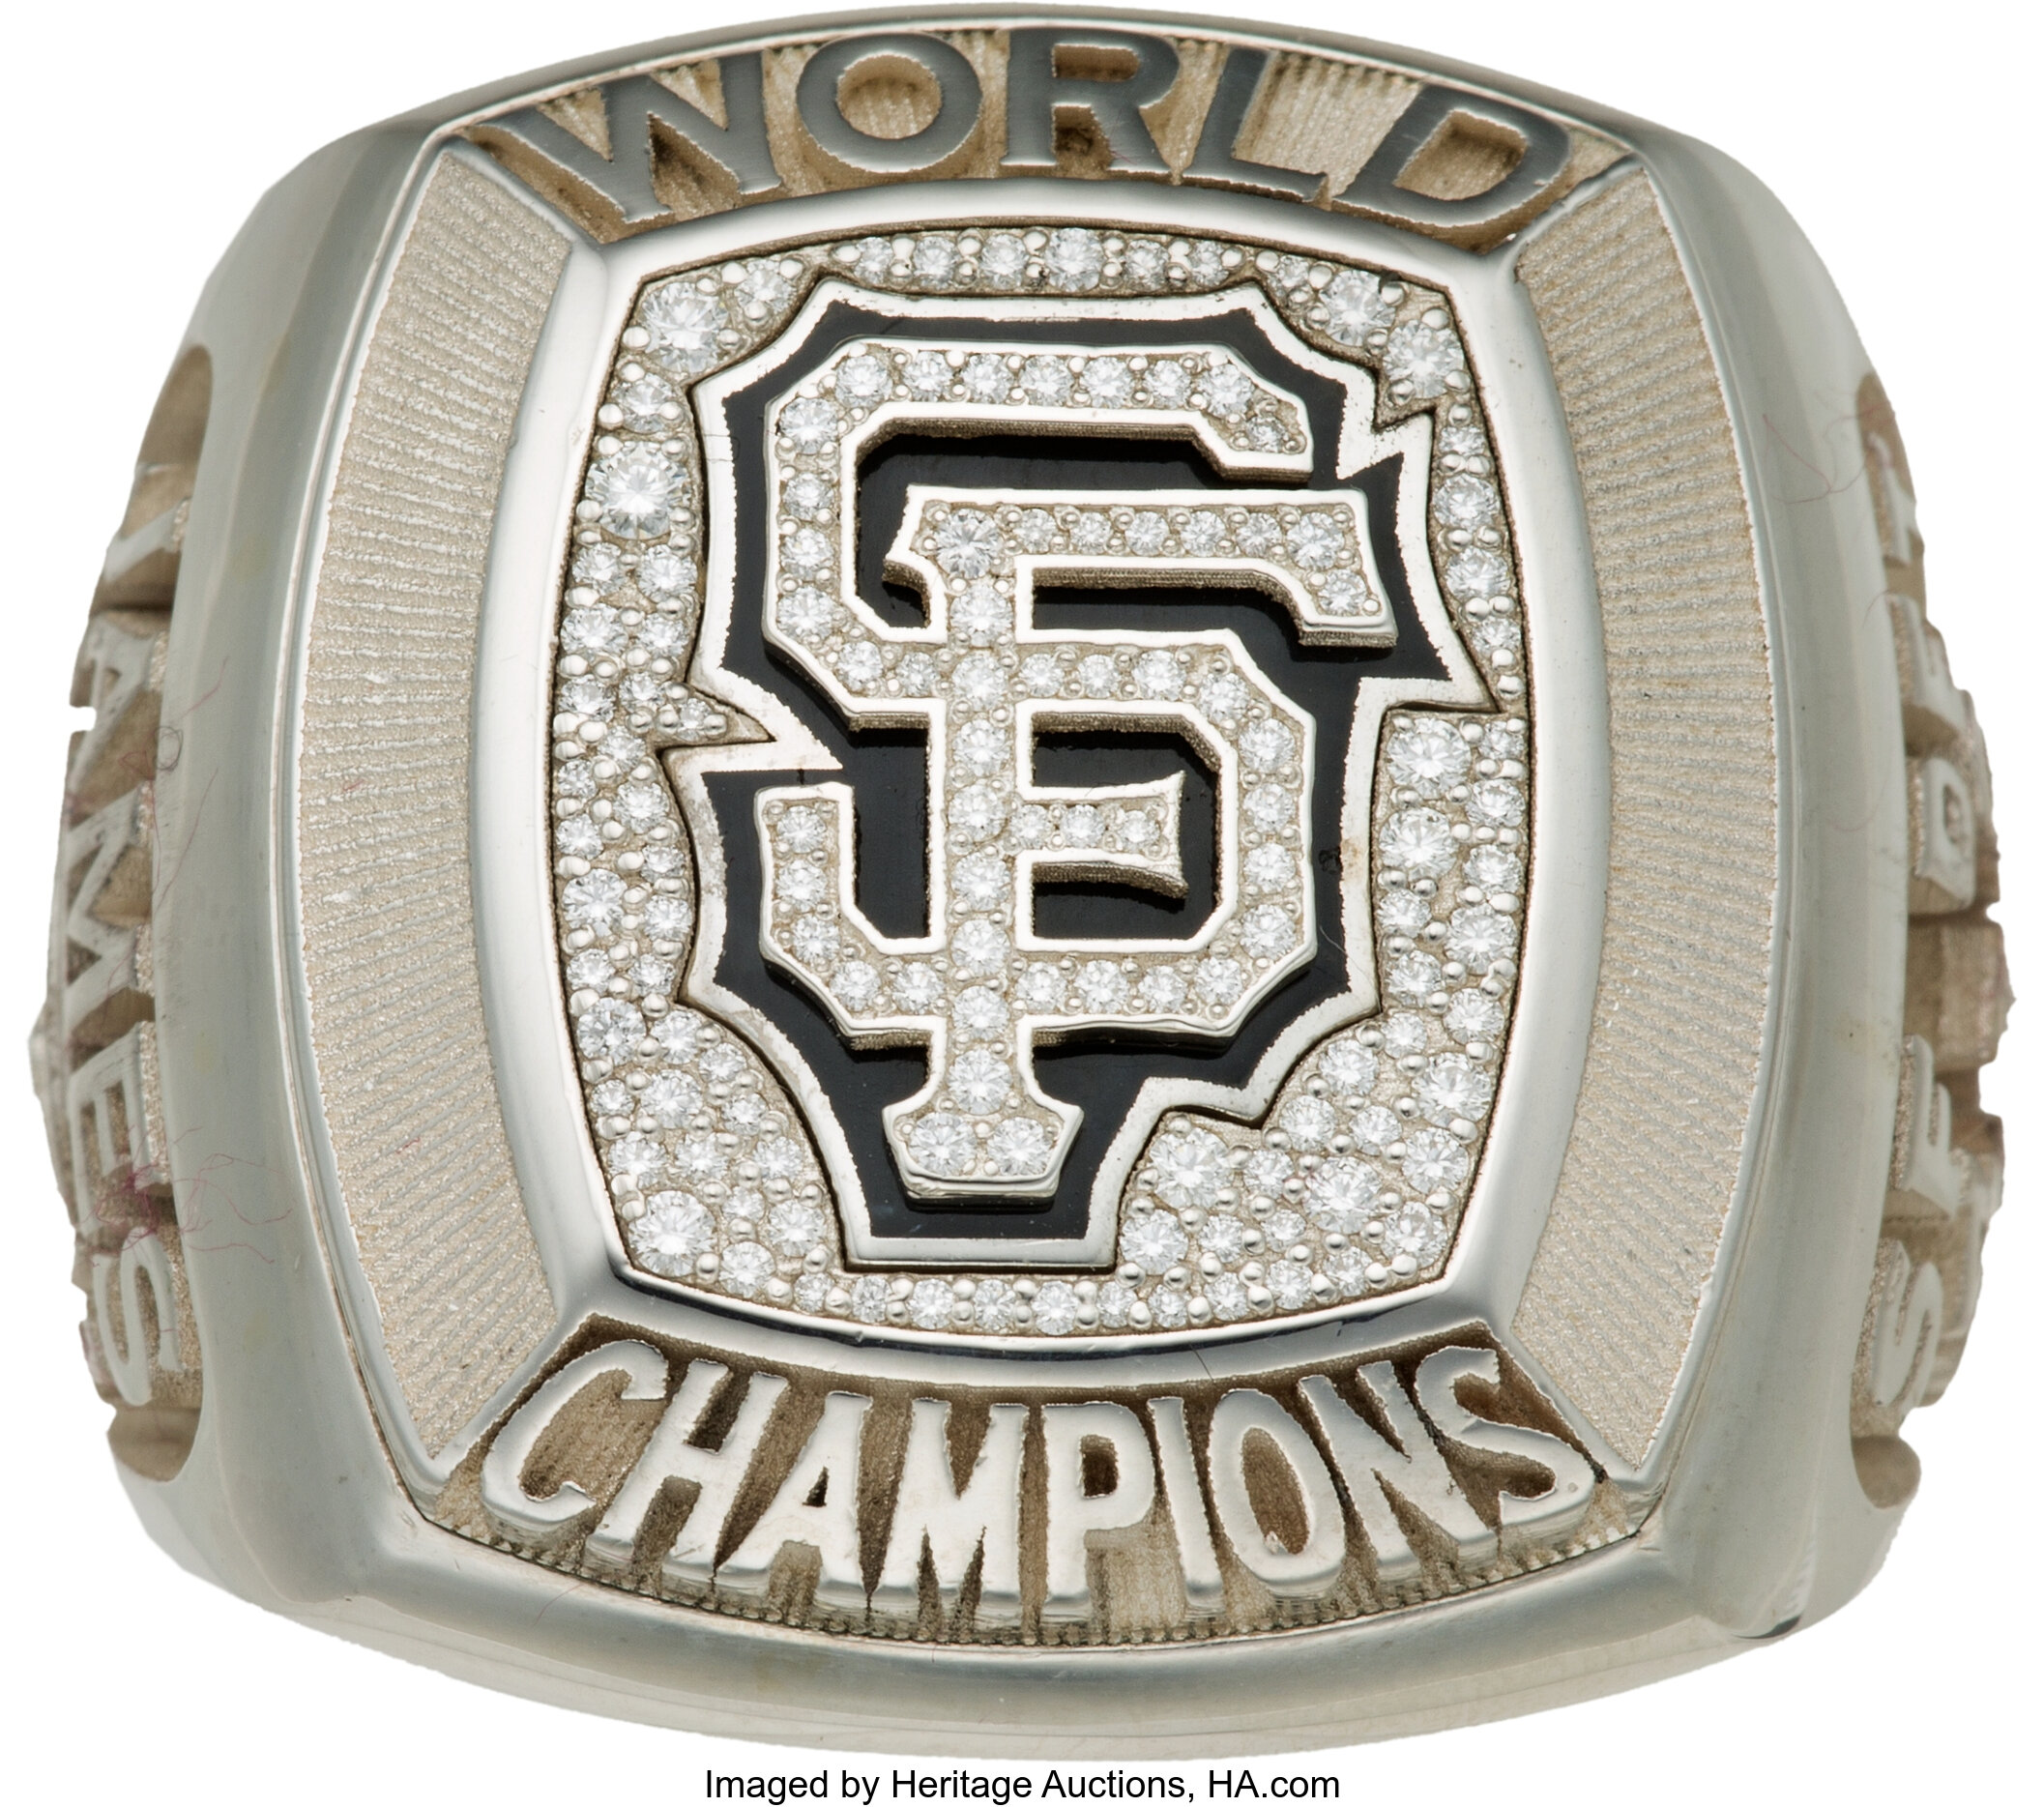 The World Series champion Giants get their rings - Mangin